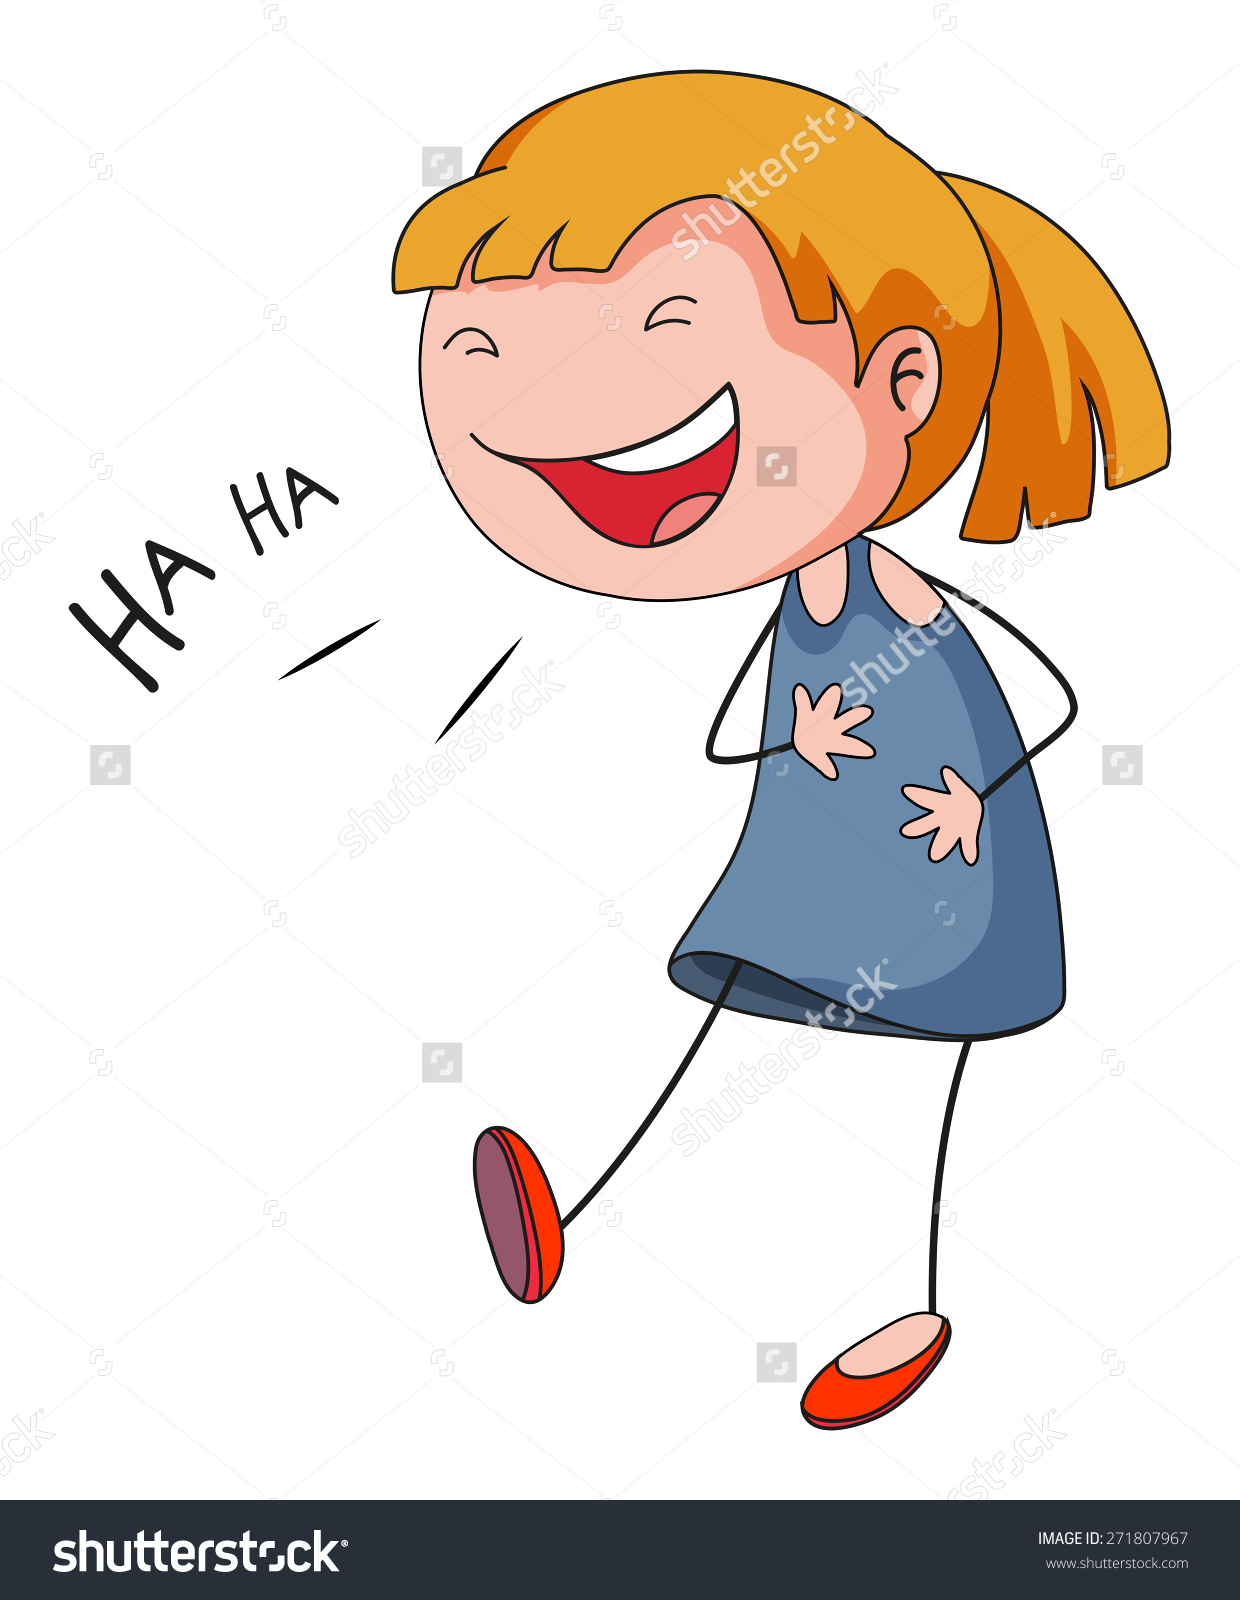 Laughter Image Clipart | Free download on ClipArtMag